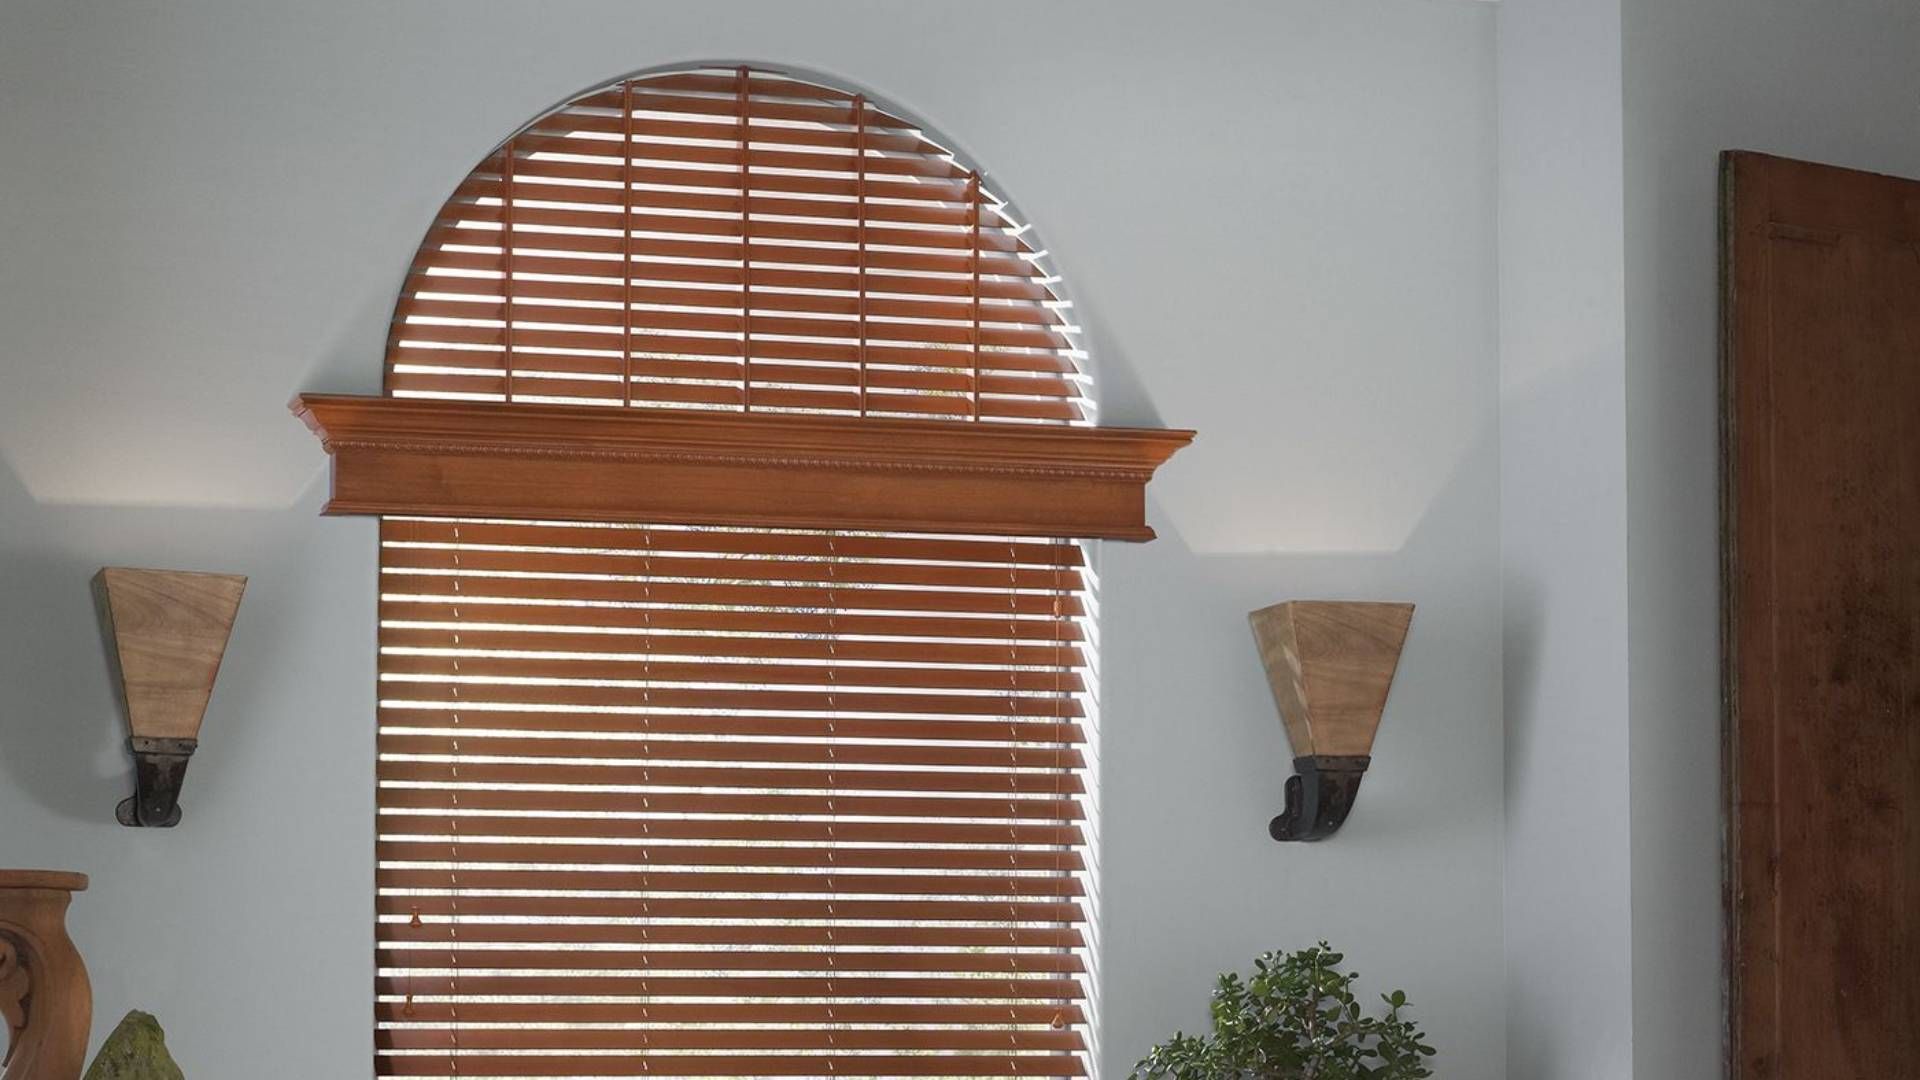 Wooden blinds decorating an arched window in a modern home at Alton Bay Blinds near Hampton, NH